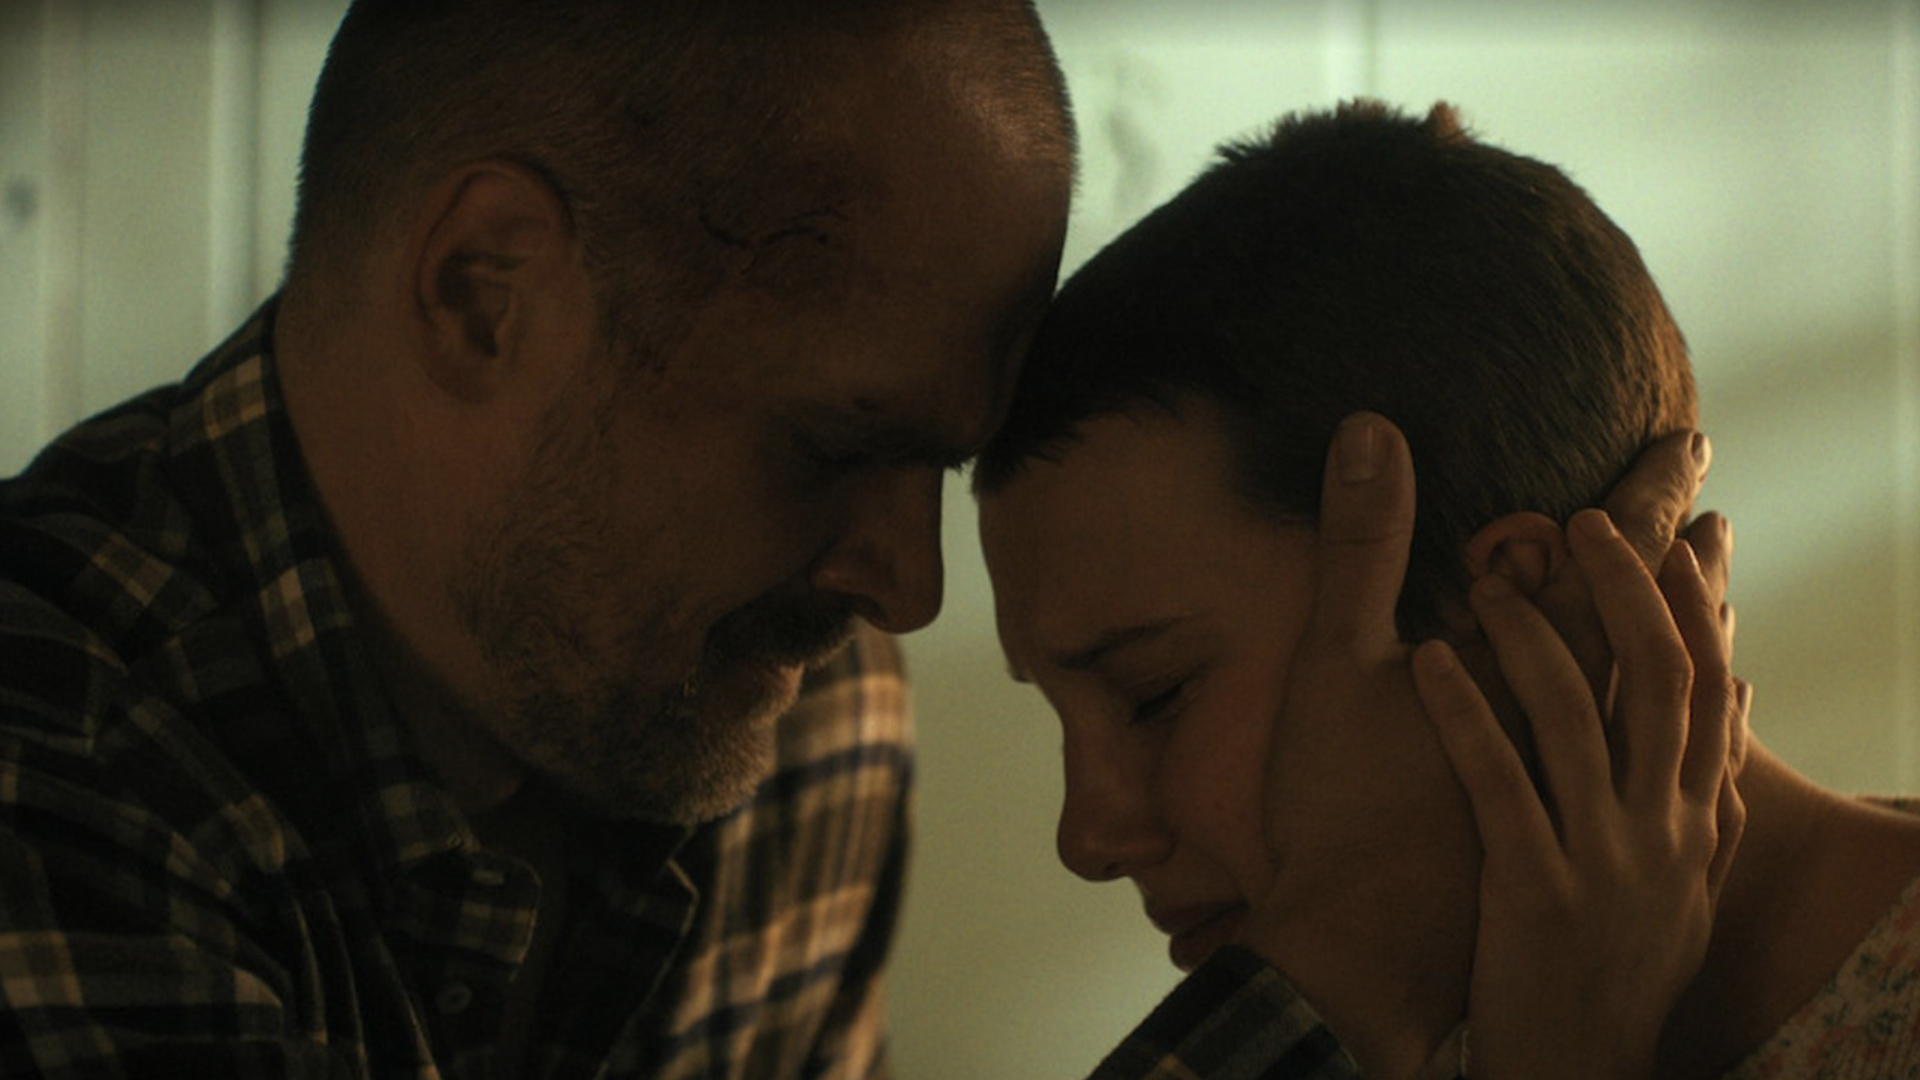 Hopper and Eleven embrace each other